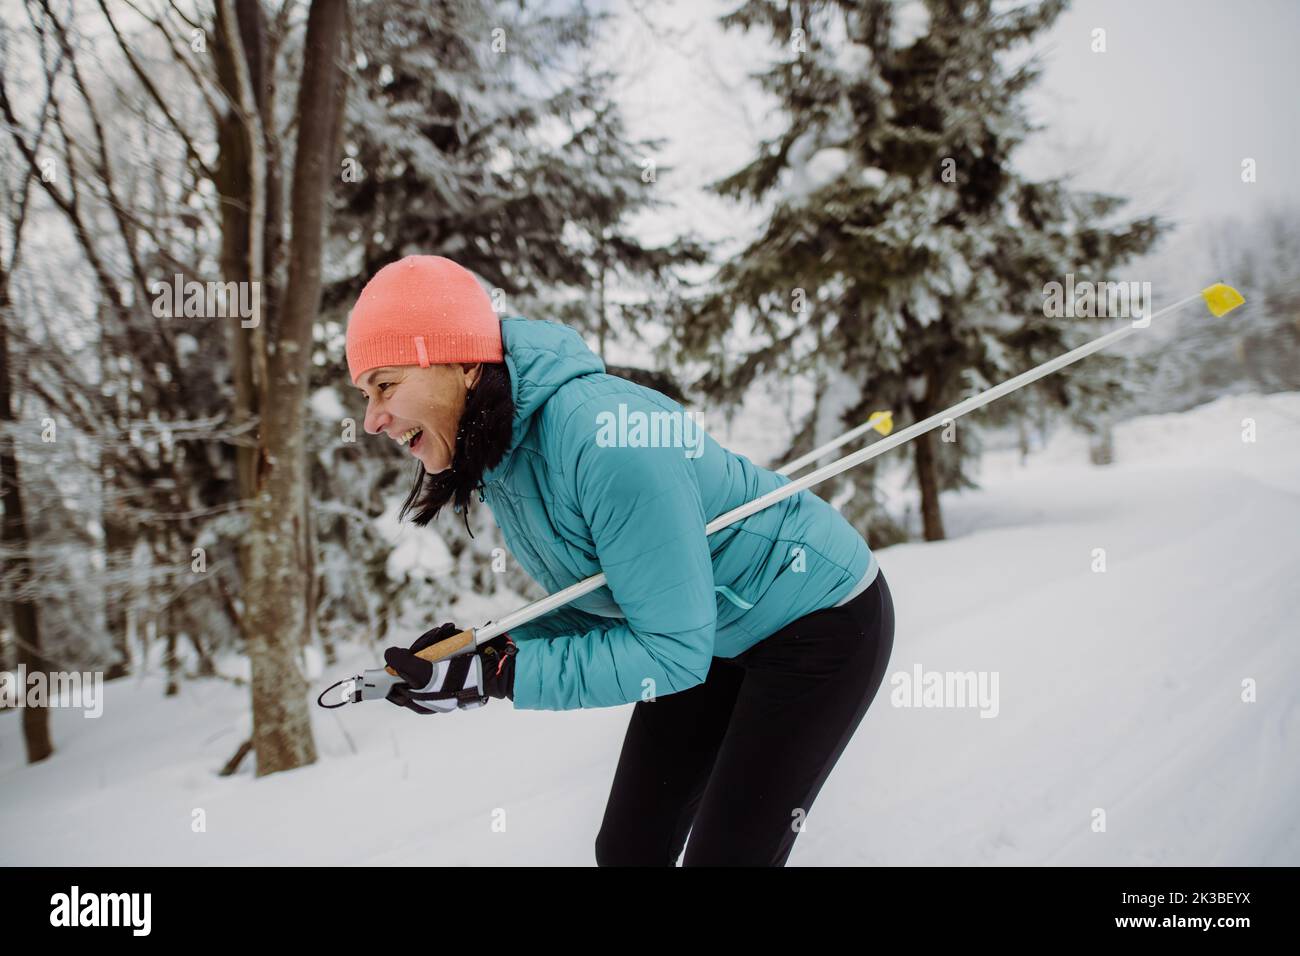 Senior woman skiing in the middle of snowy forest. Stock Photo